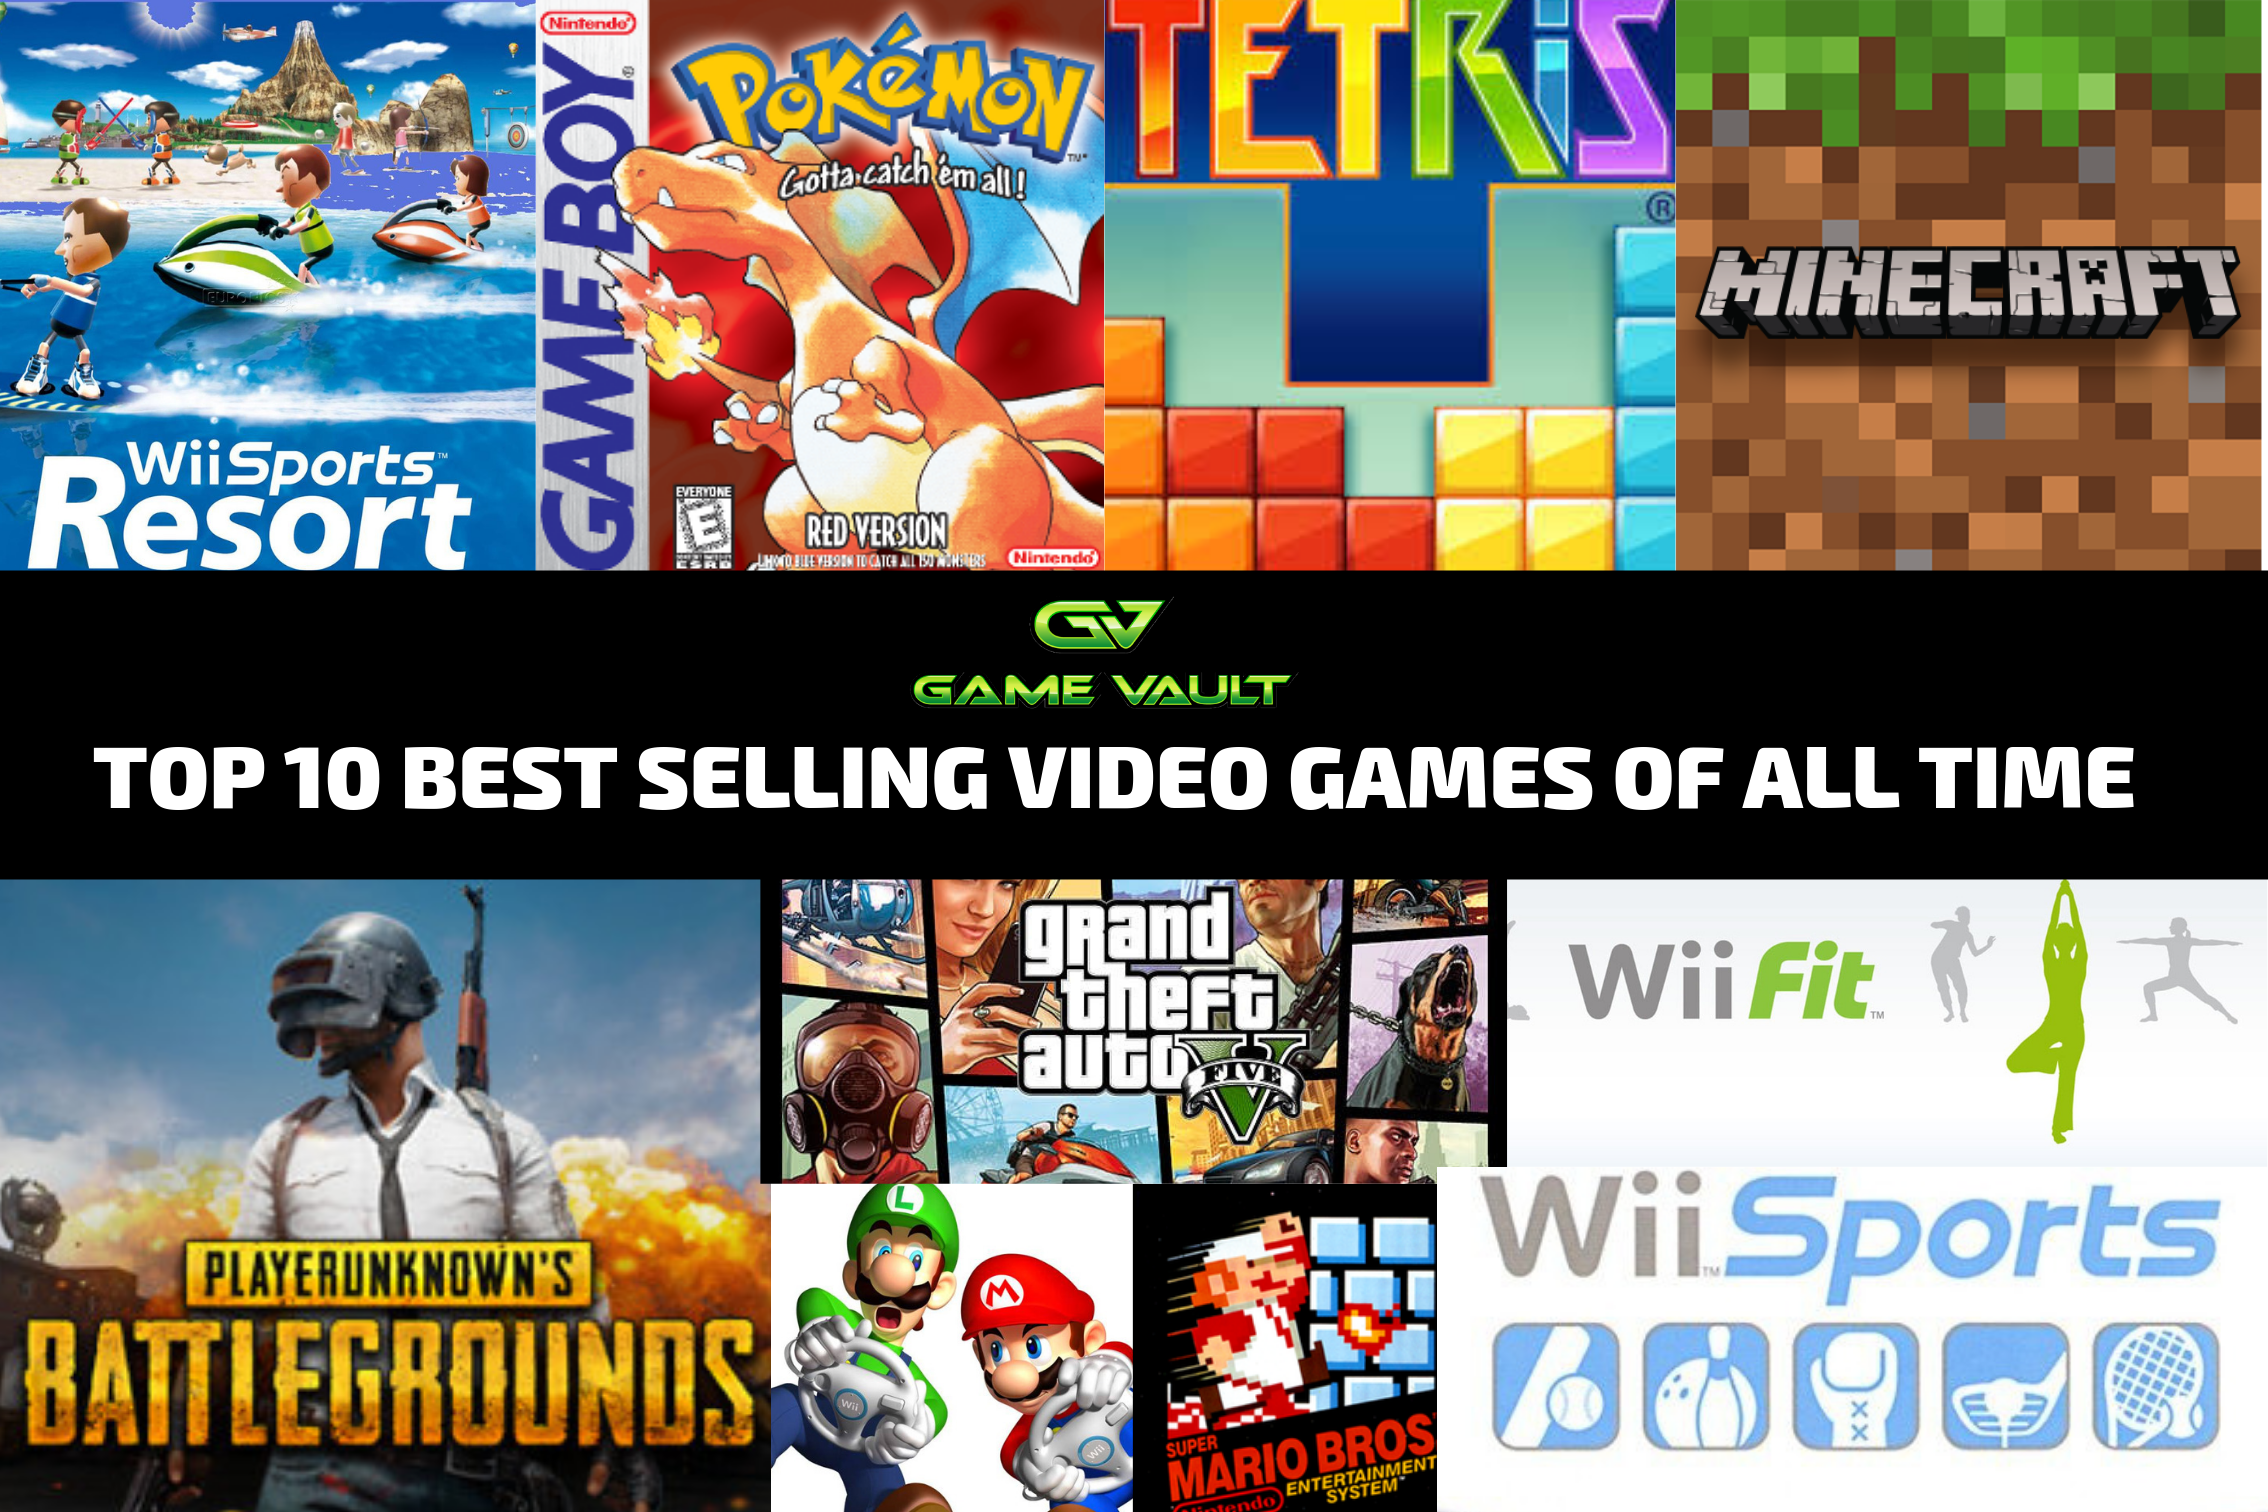 Top 10 Best Selling Video Games of All Time